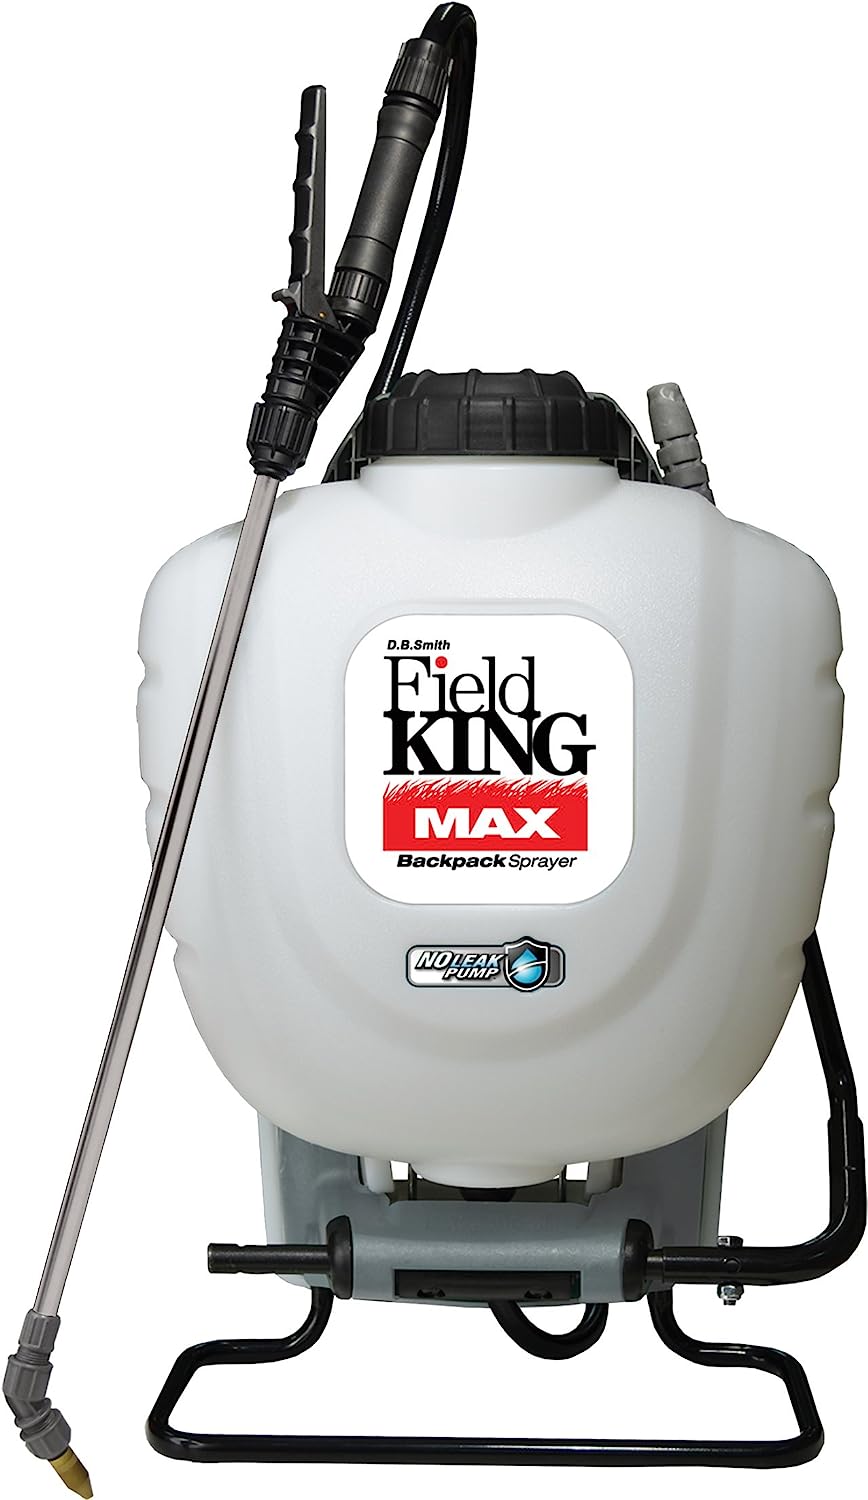 Field King Max 190348 Backpack Sprayer for [...]